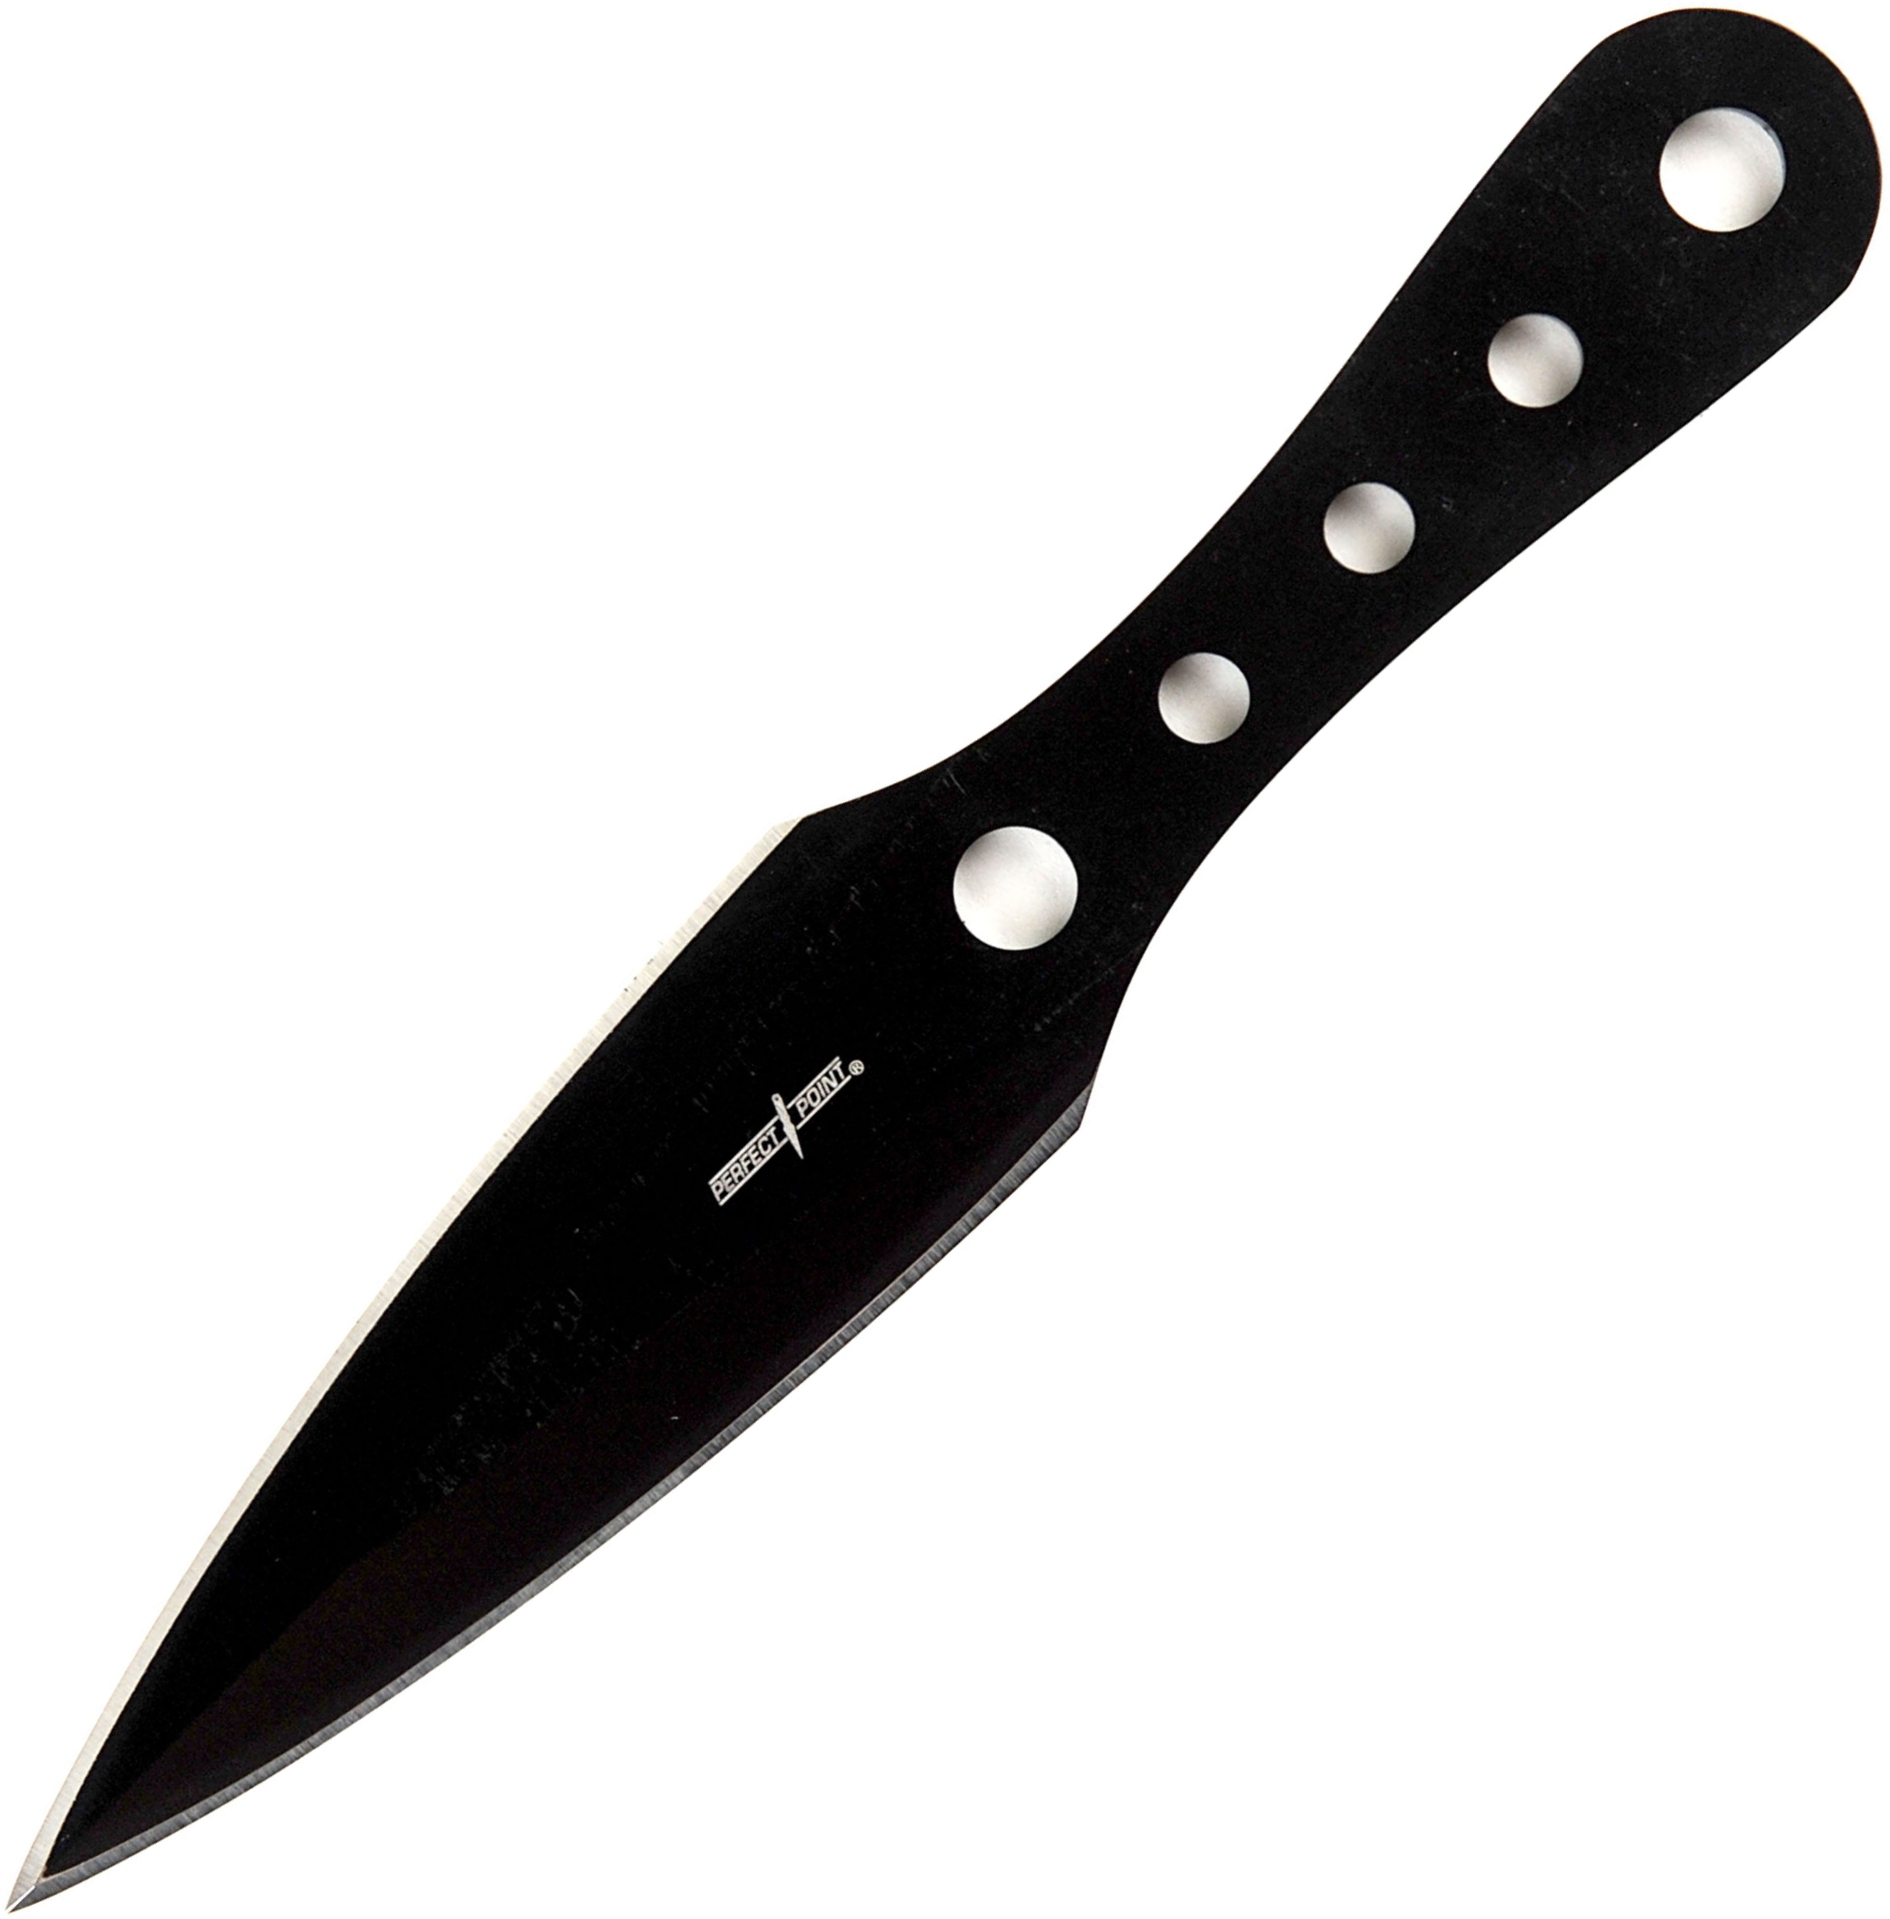 clipart pictures of knives - photo #44